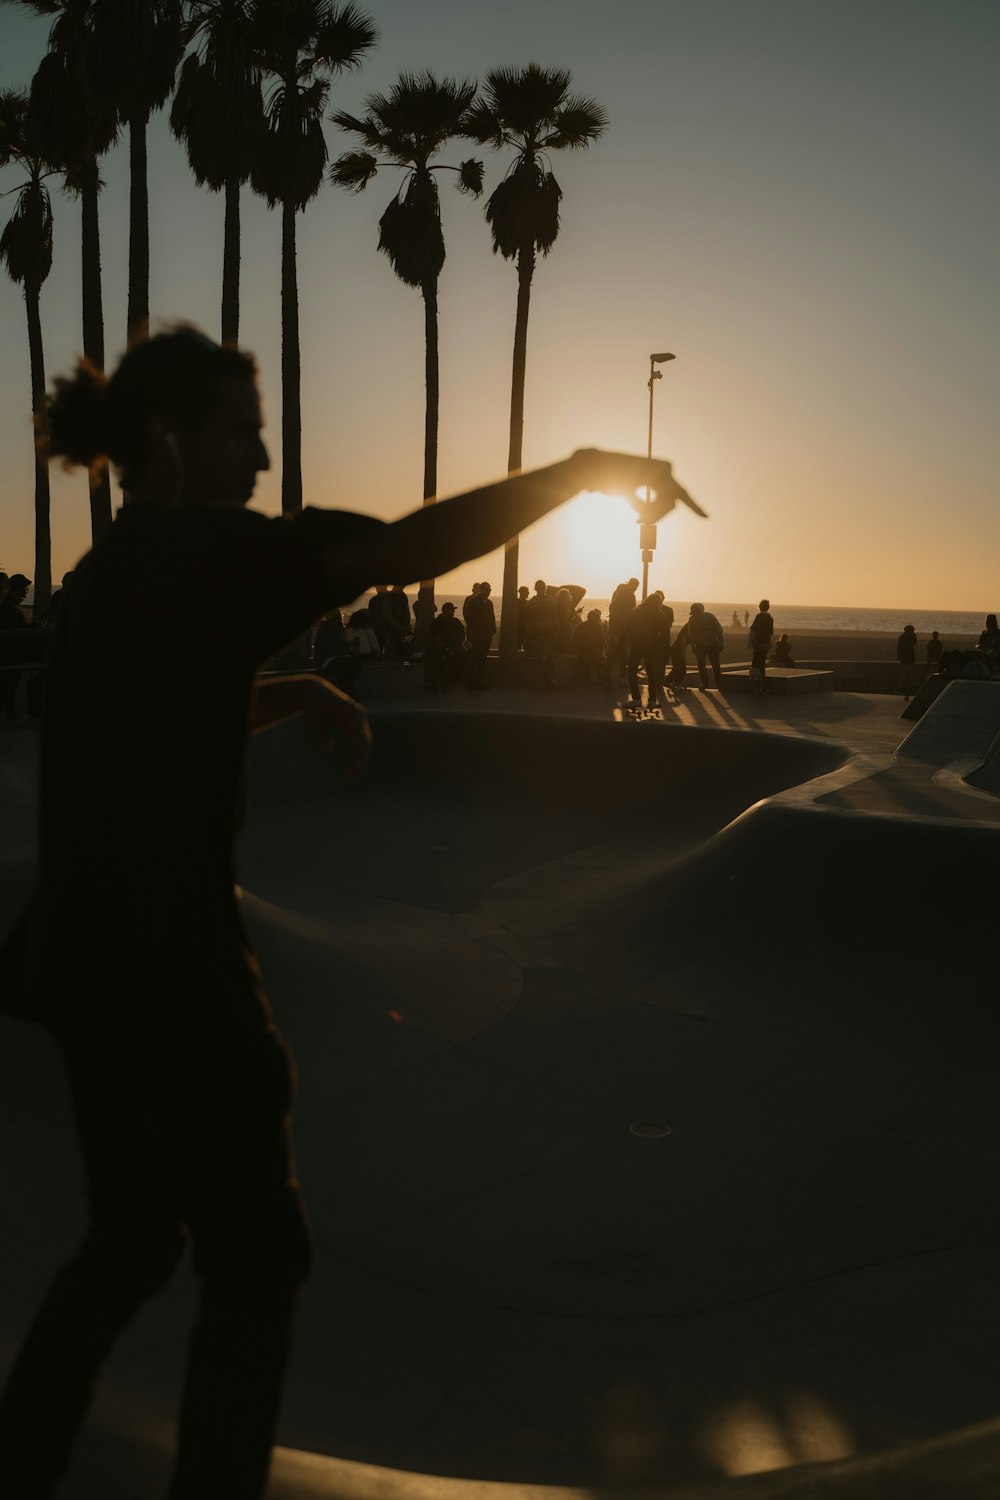 a skateboarder doing a trick in front of palm trees